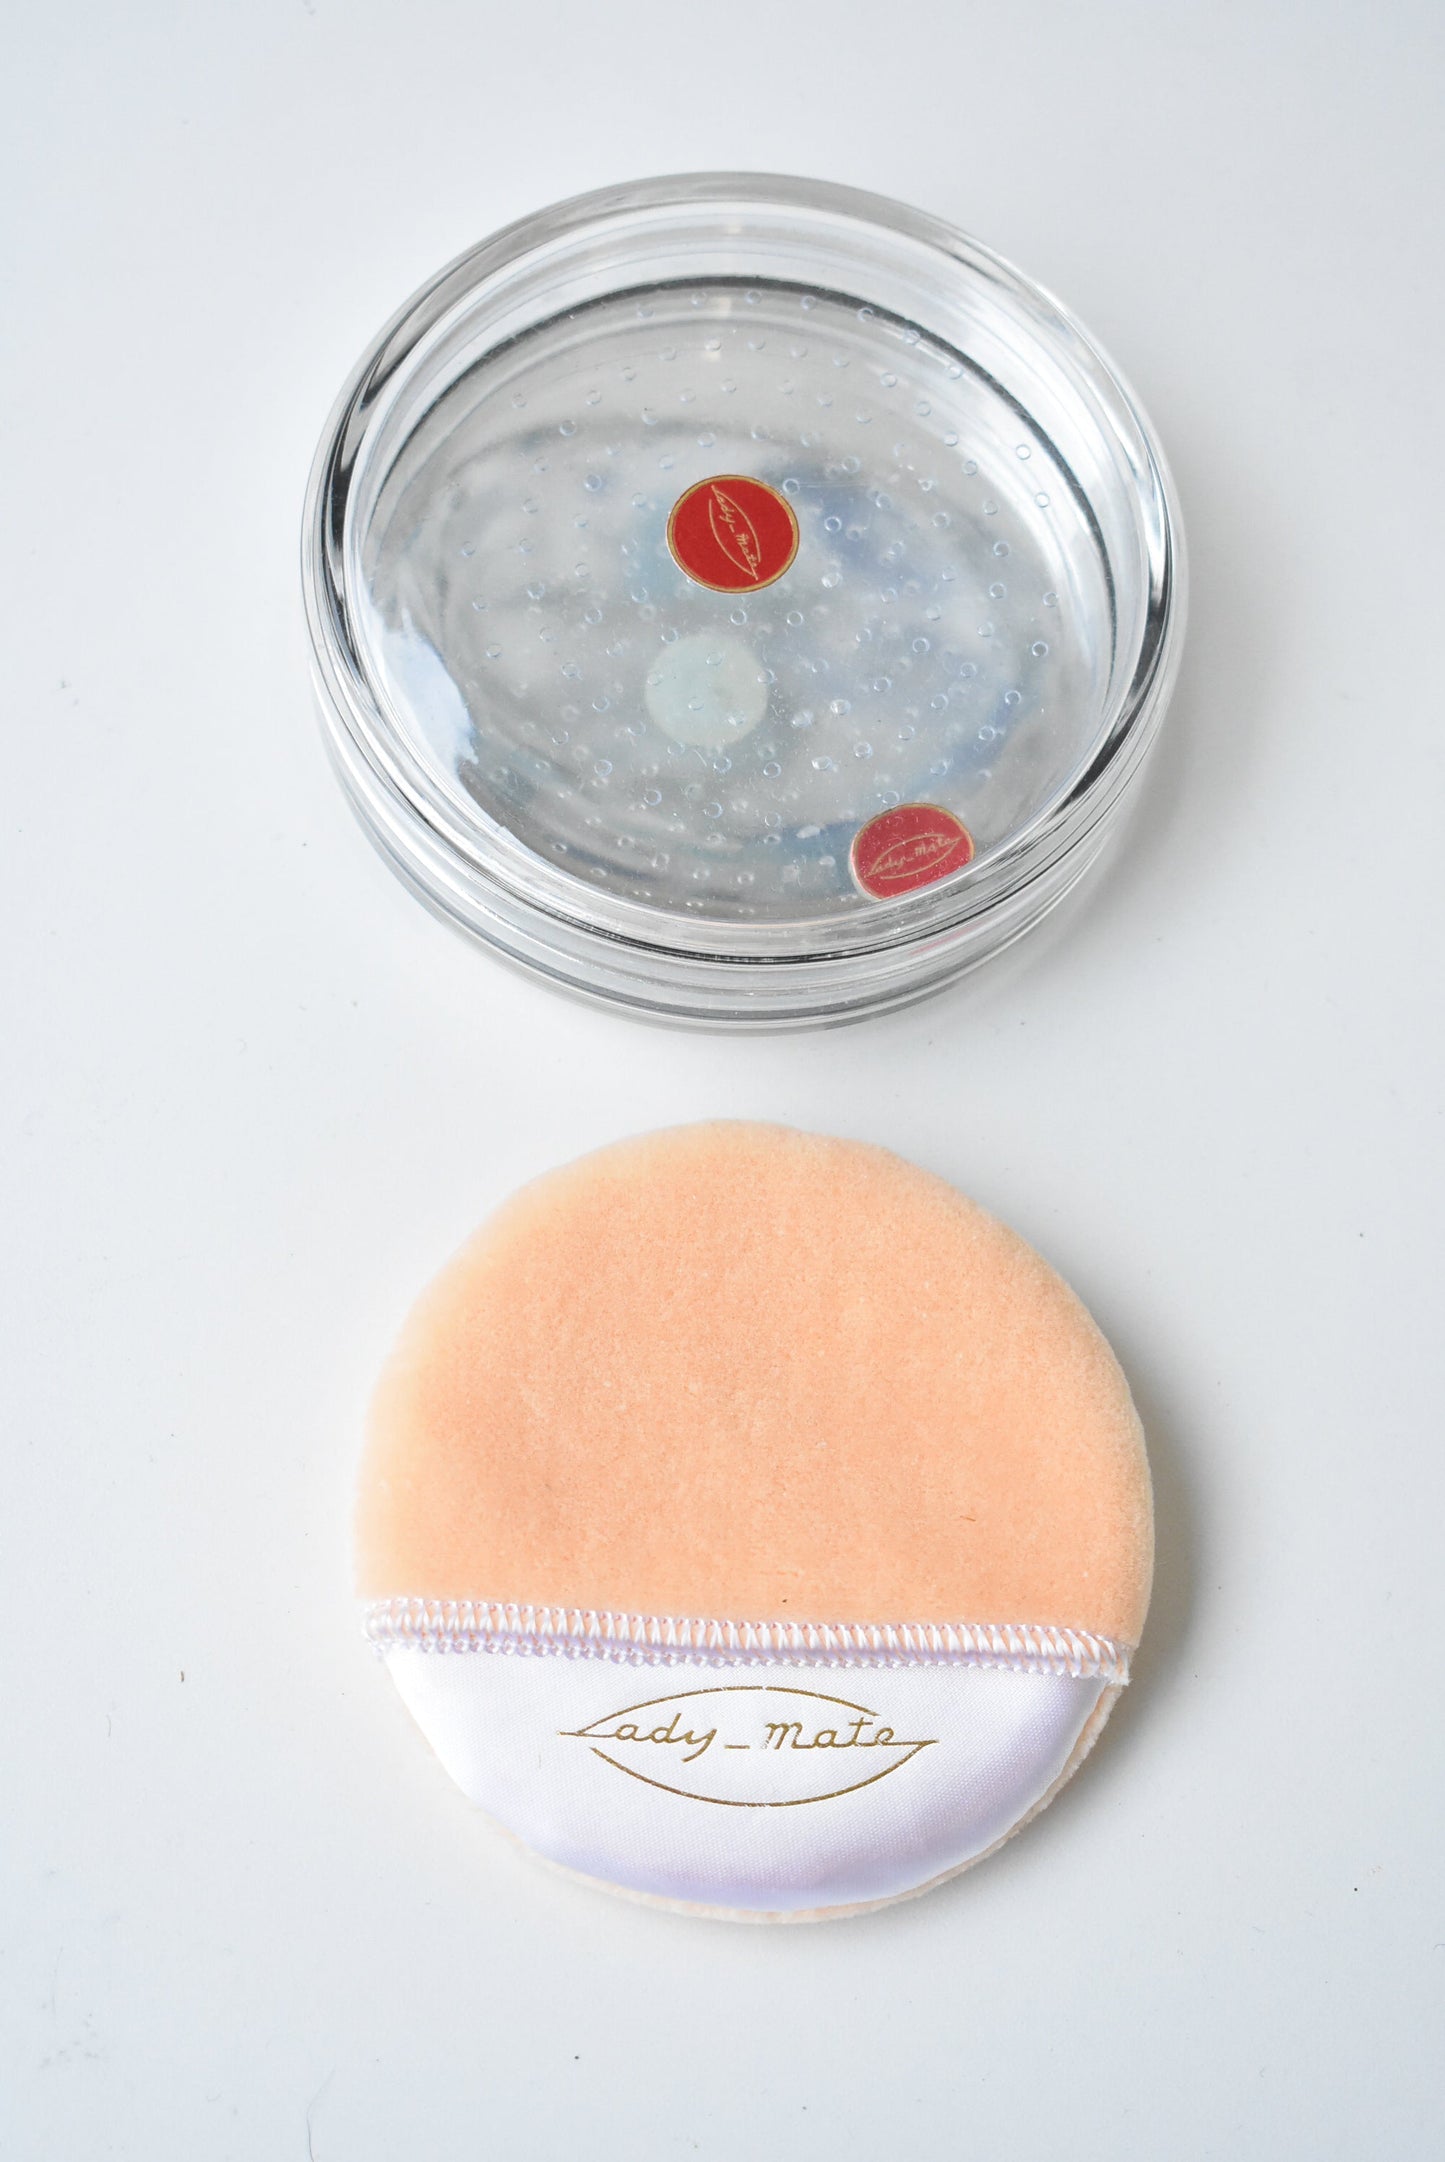 Vintage lady mate powder puff and mirror compact